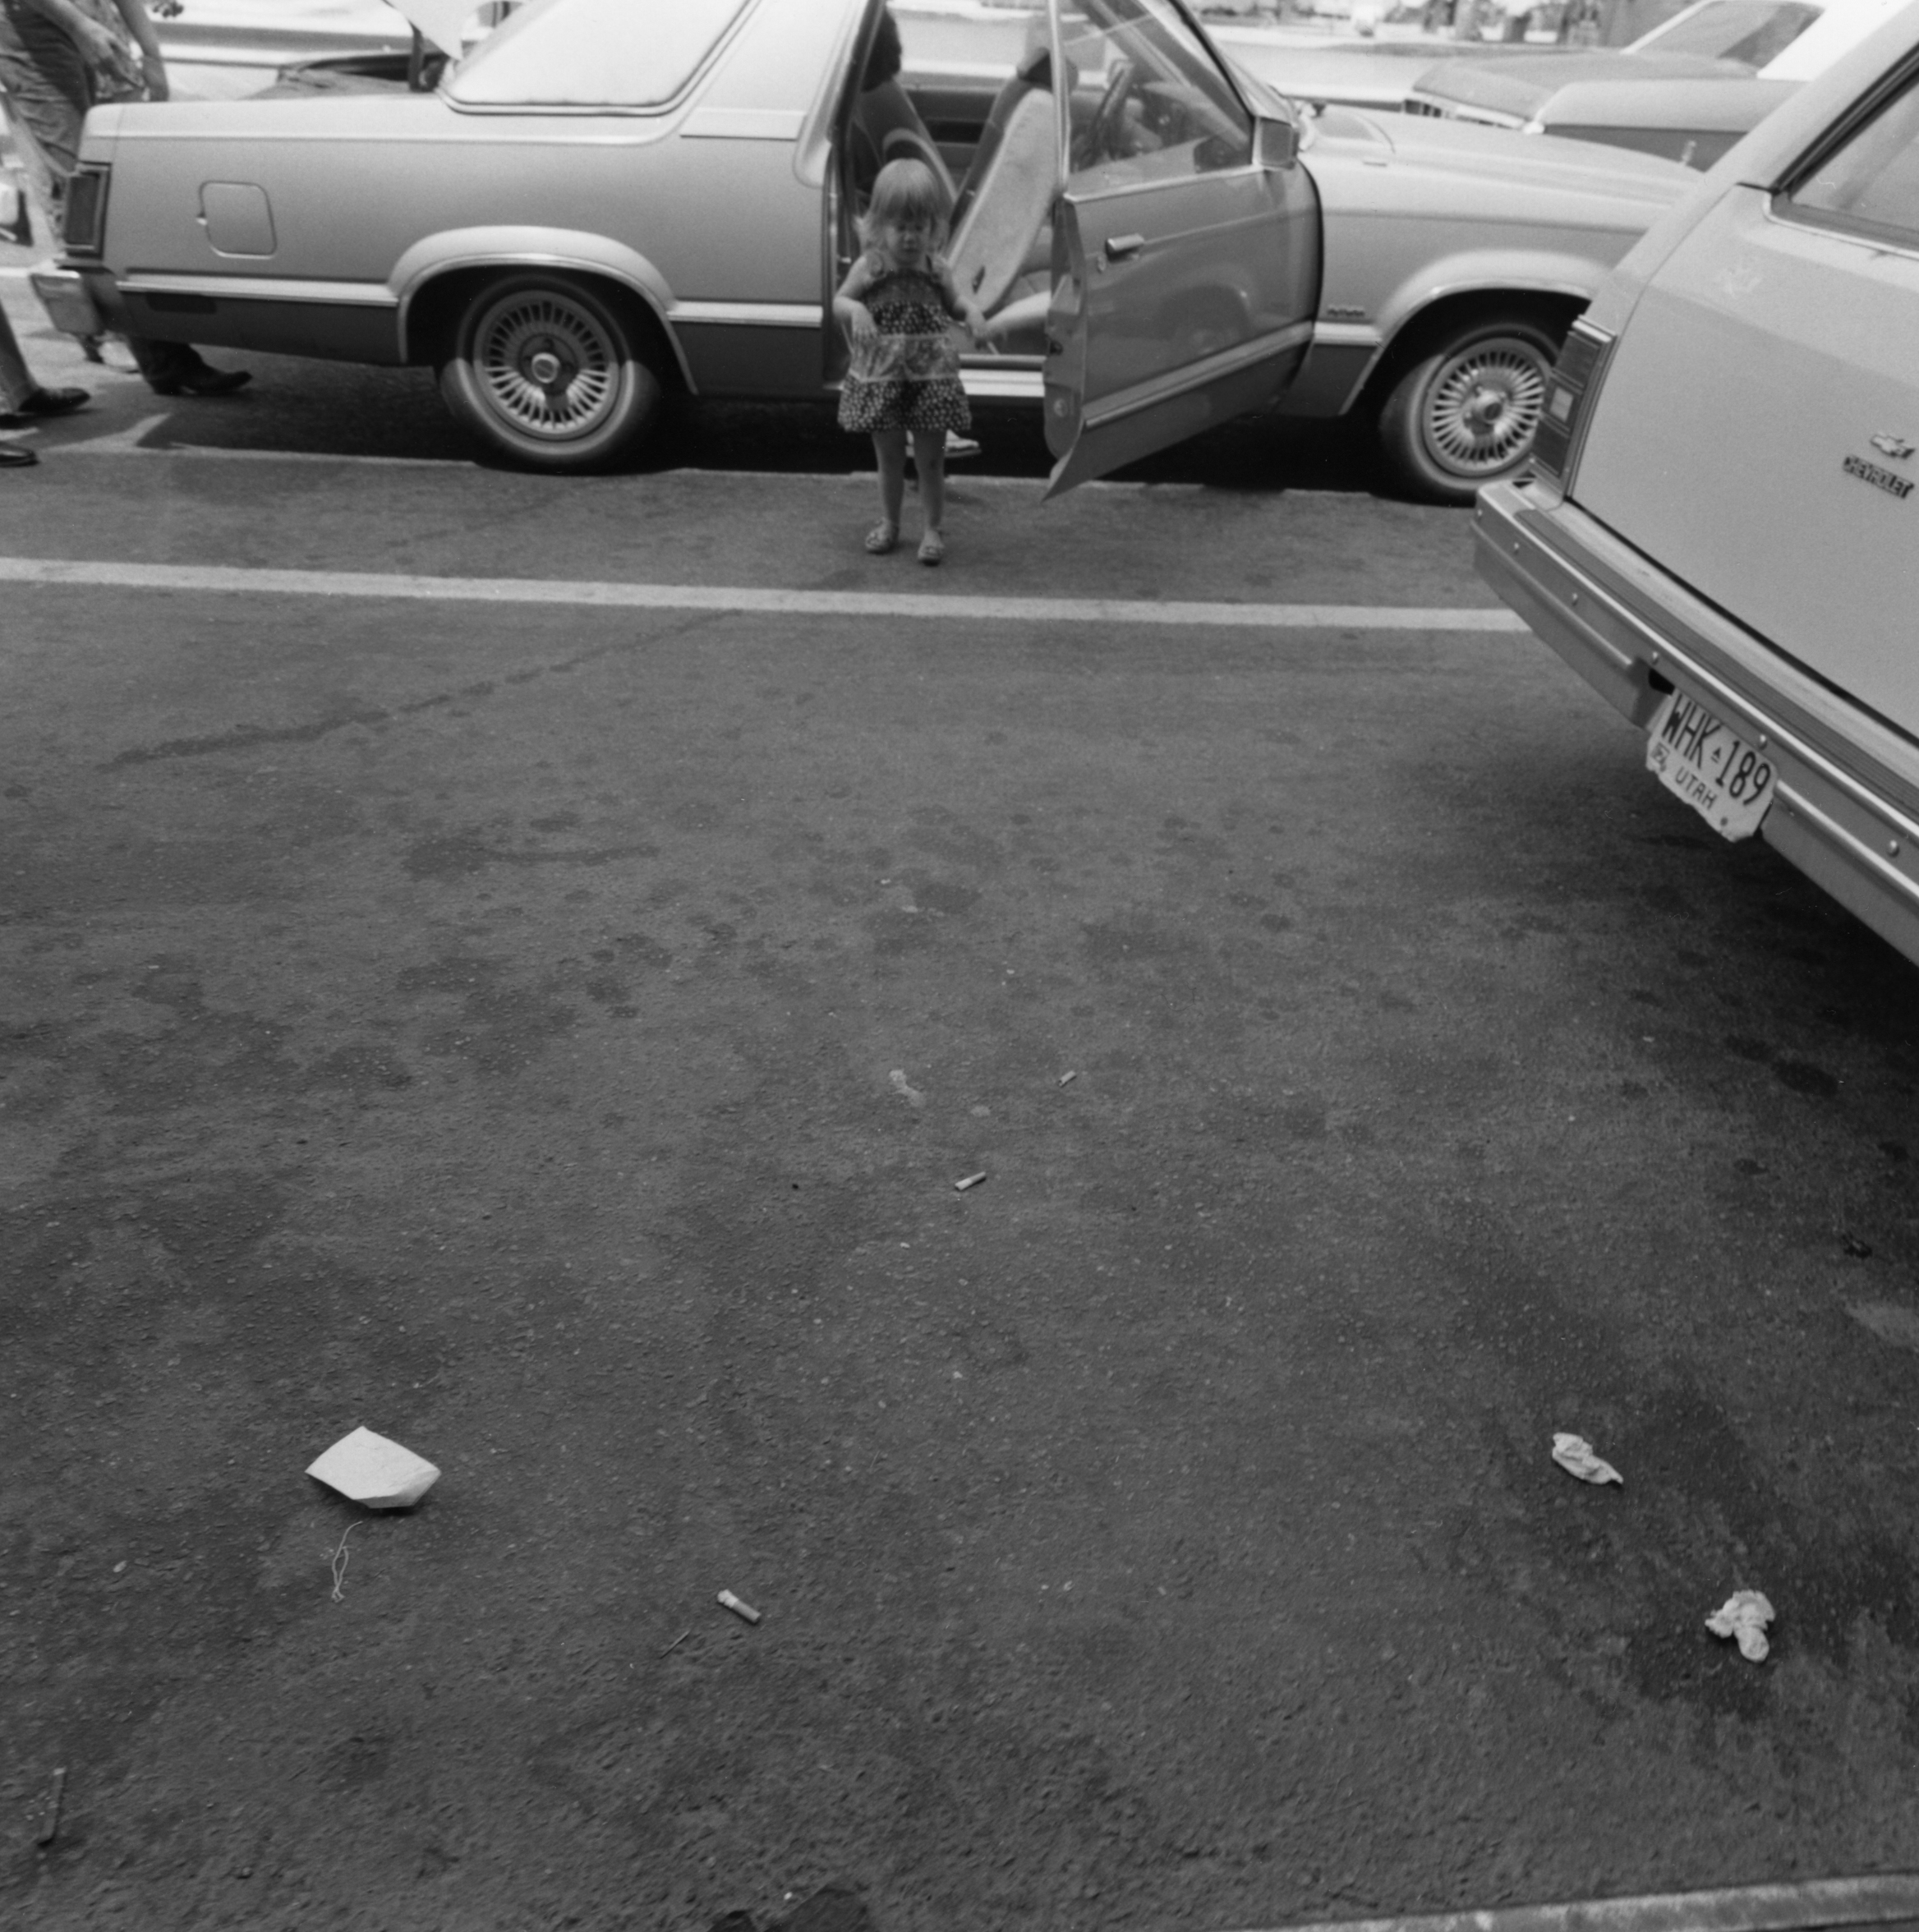 Black and white photograph of a child exiting a car and standing in a parking lot with littered debris